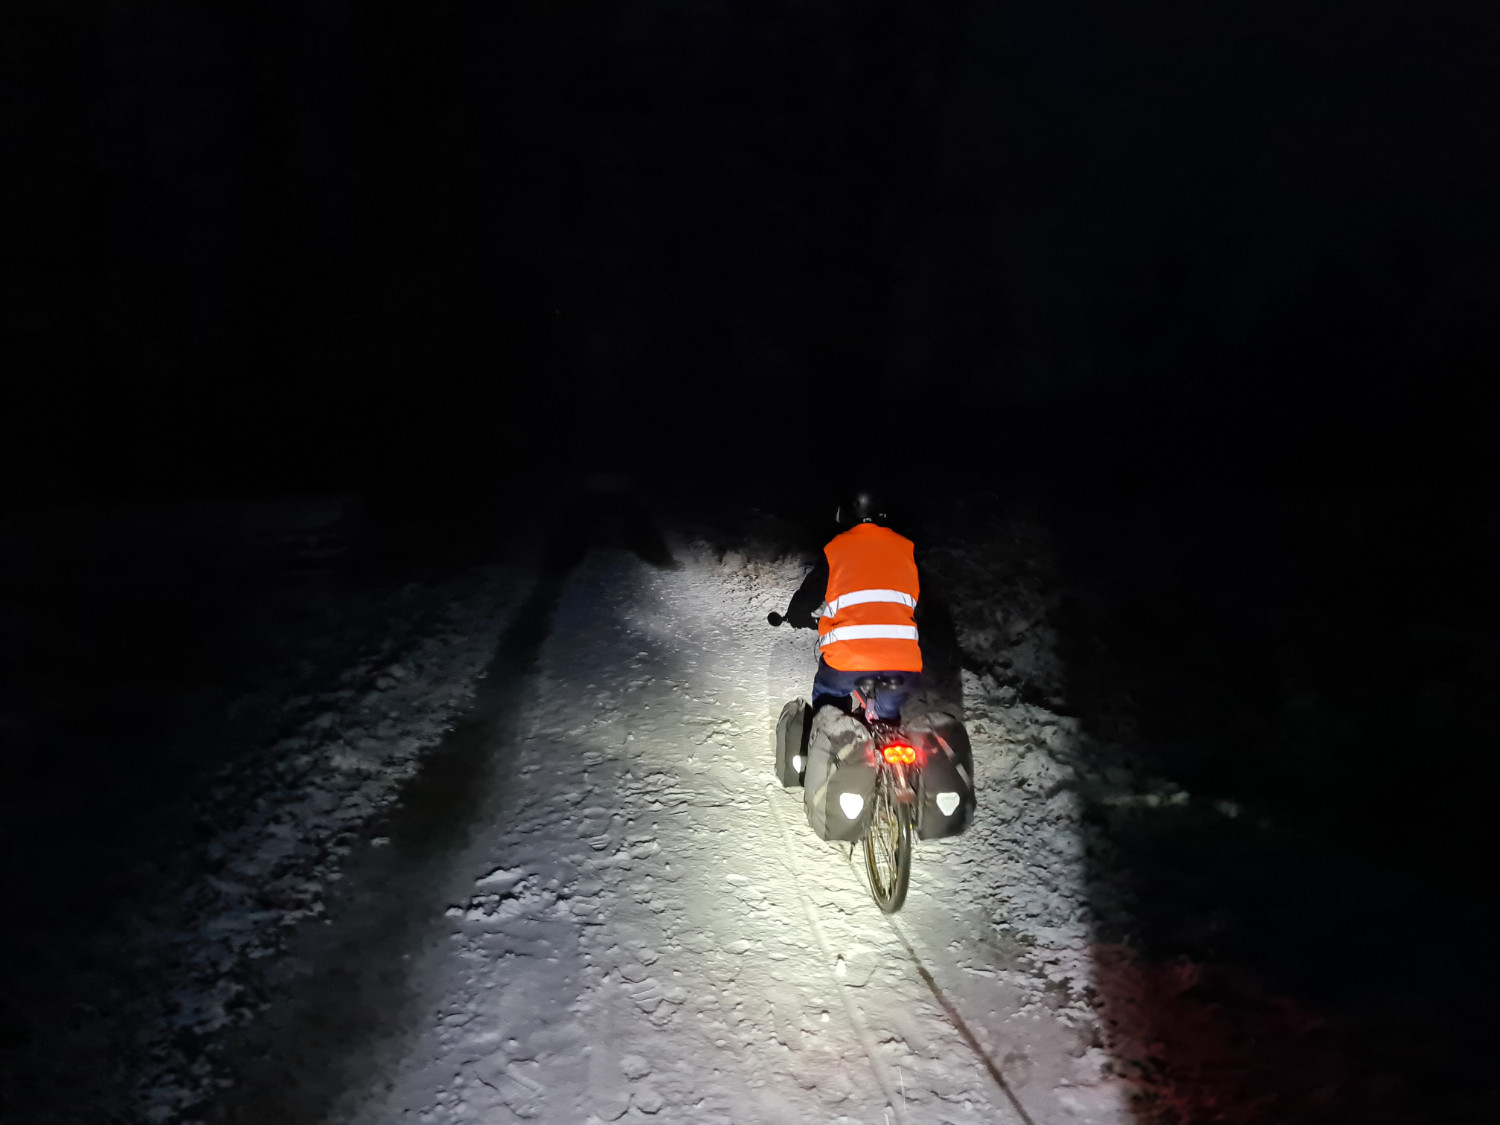 Night riding in the snow